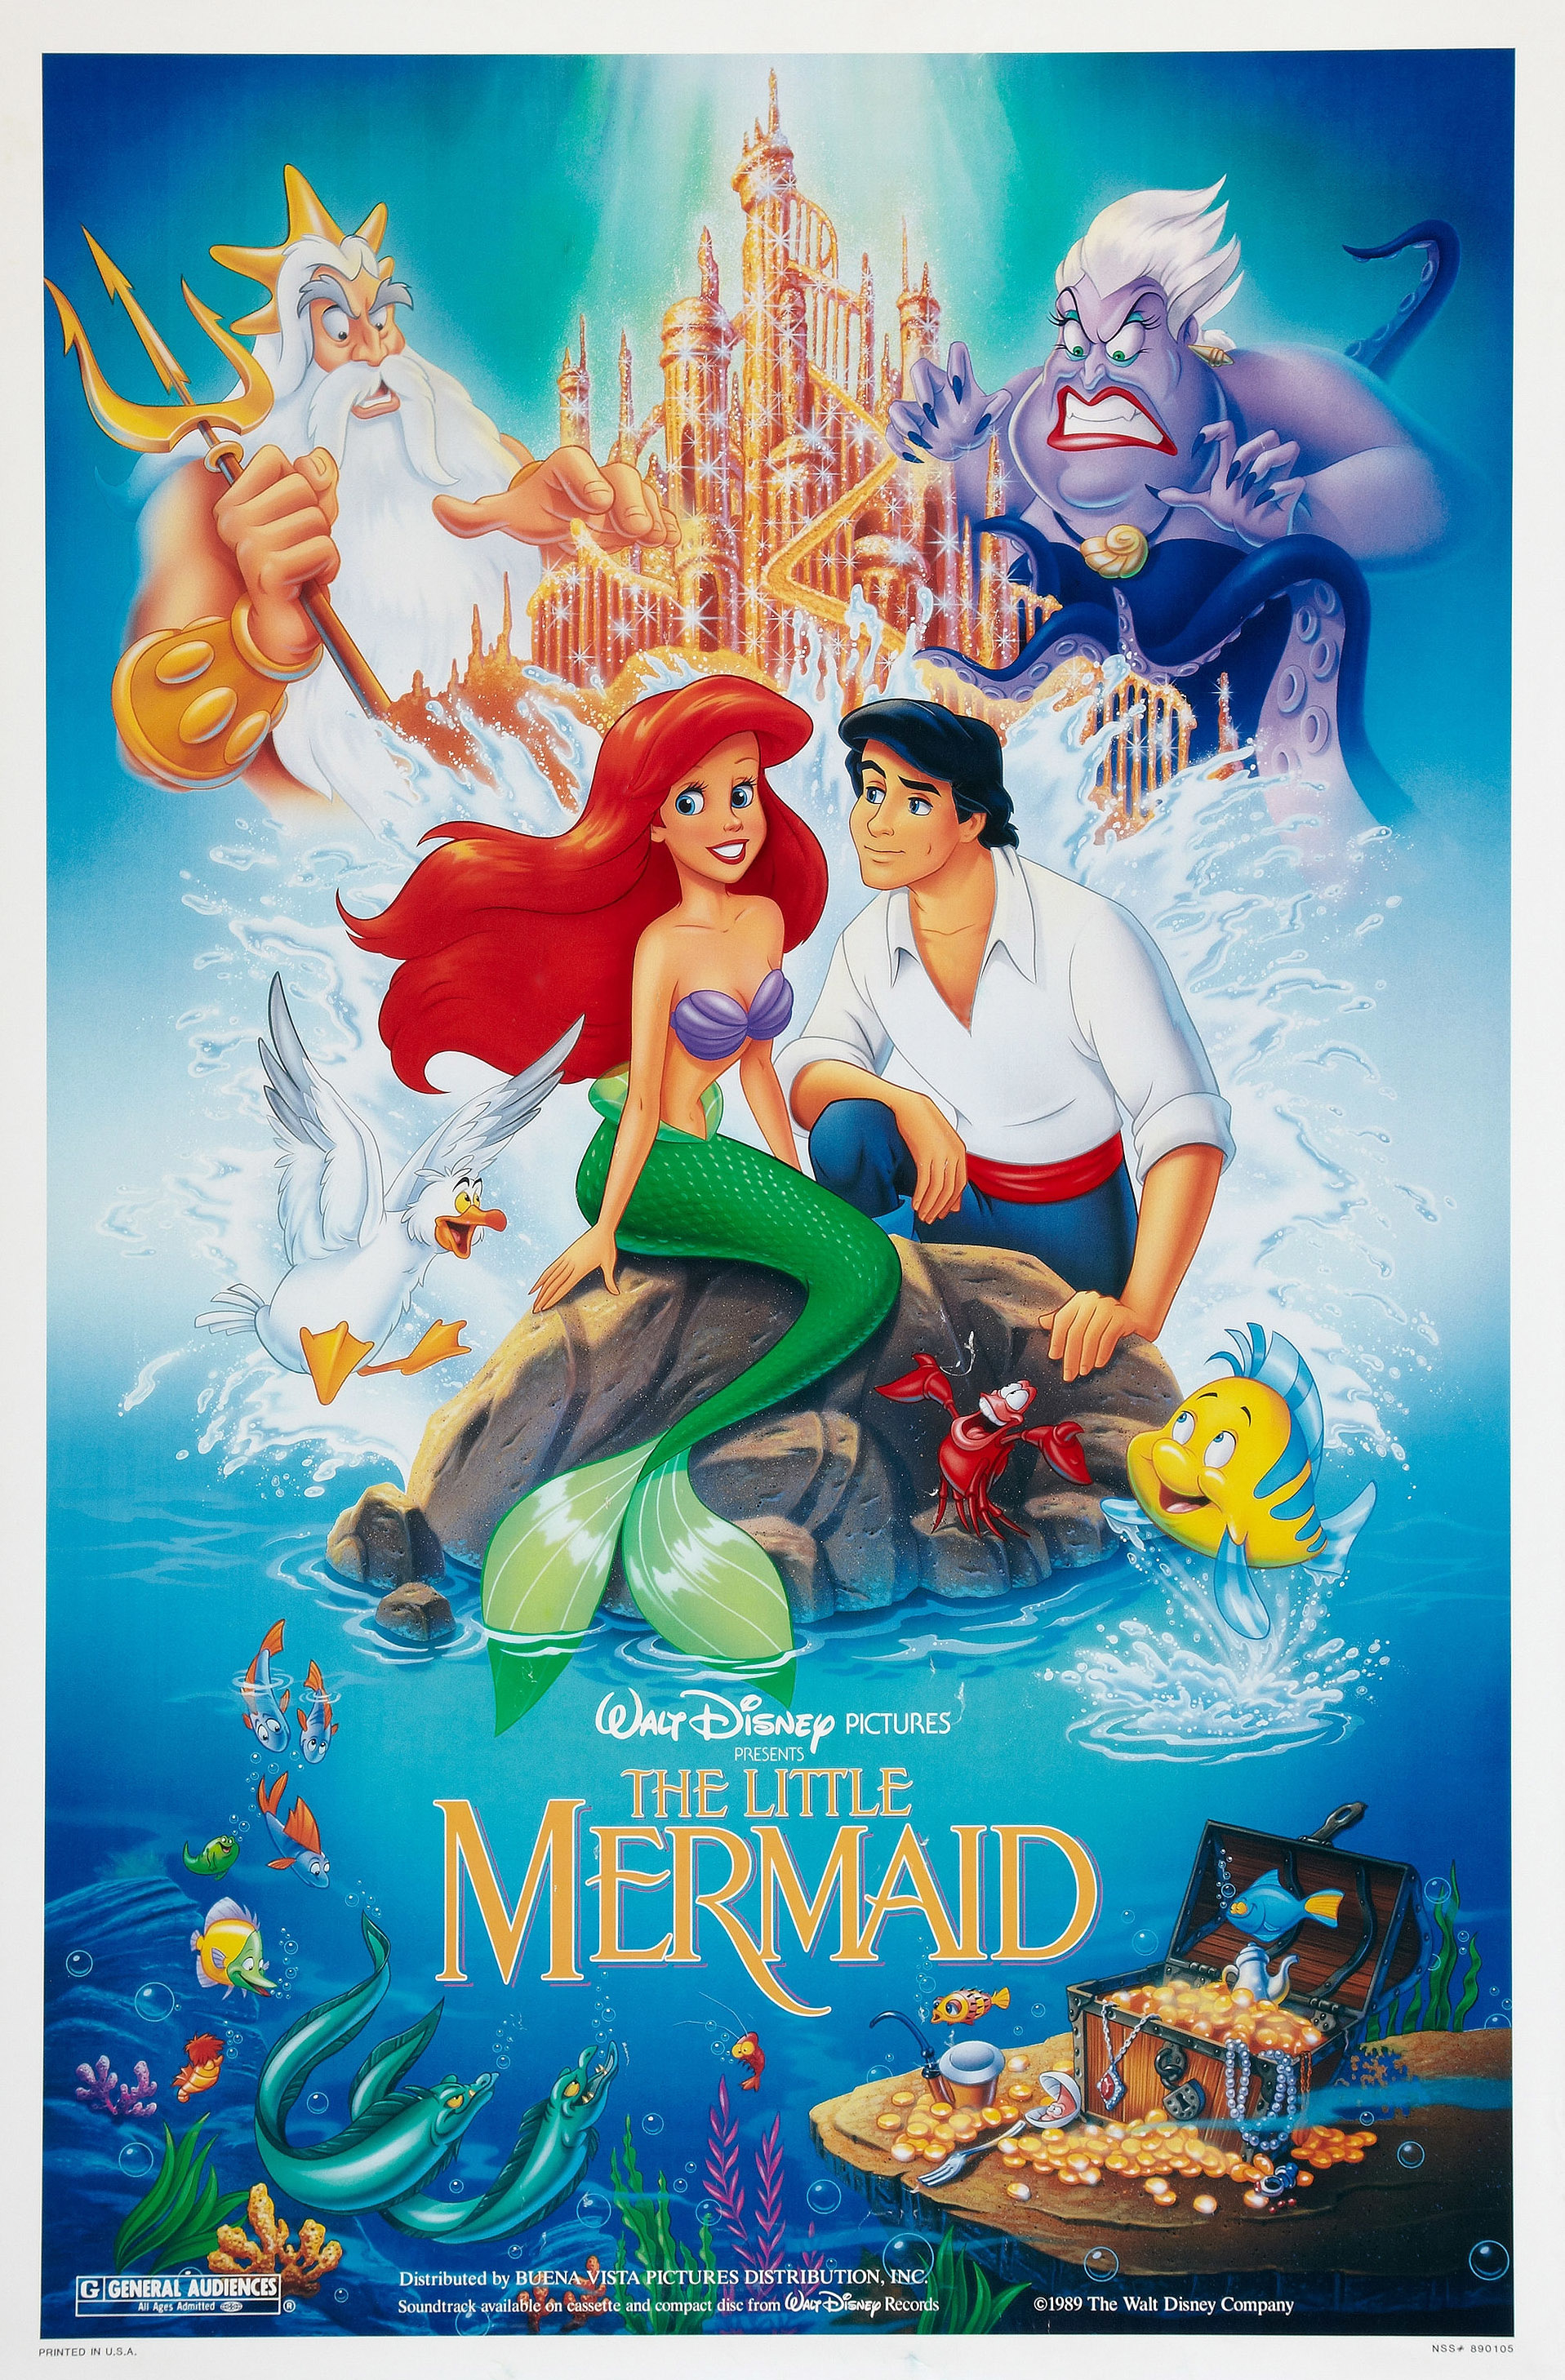 Movie poster of &quot;The Little Mermaid&quot; with Ariel, Flounder, Sebastian, Ursula, Triton, and Prince Eric